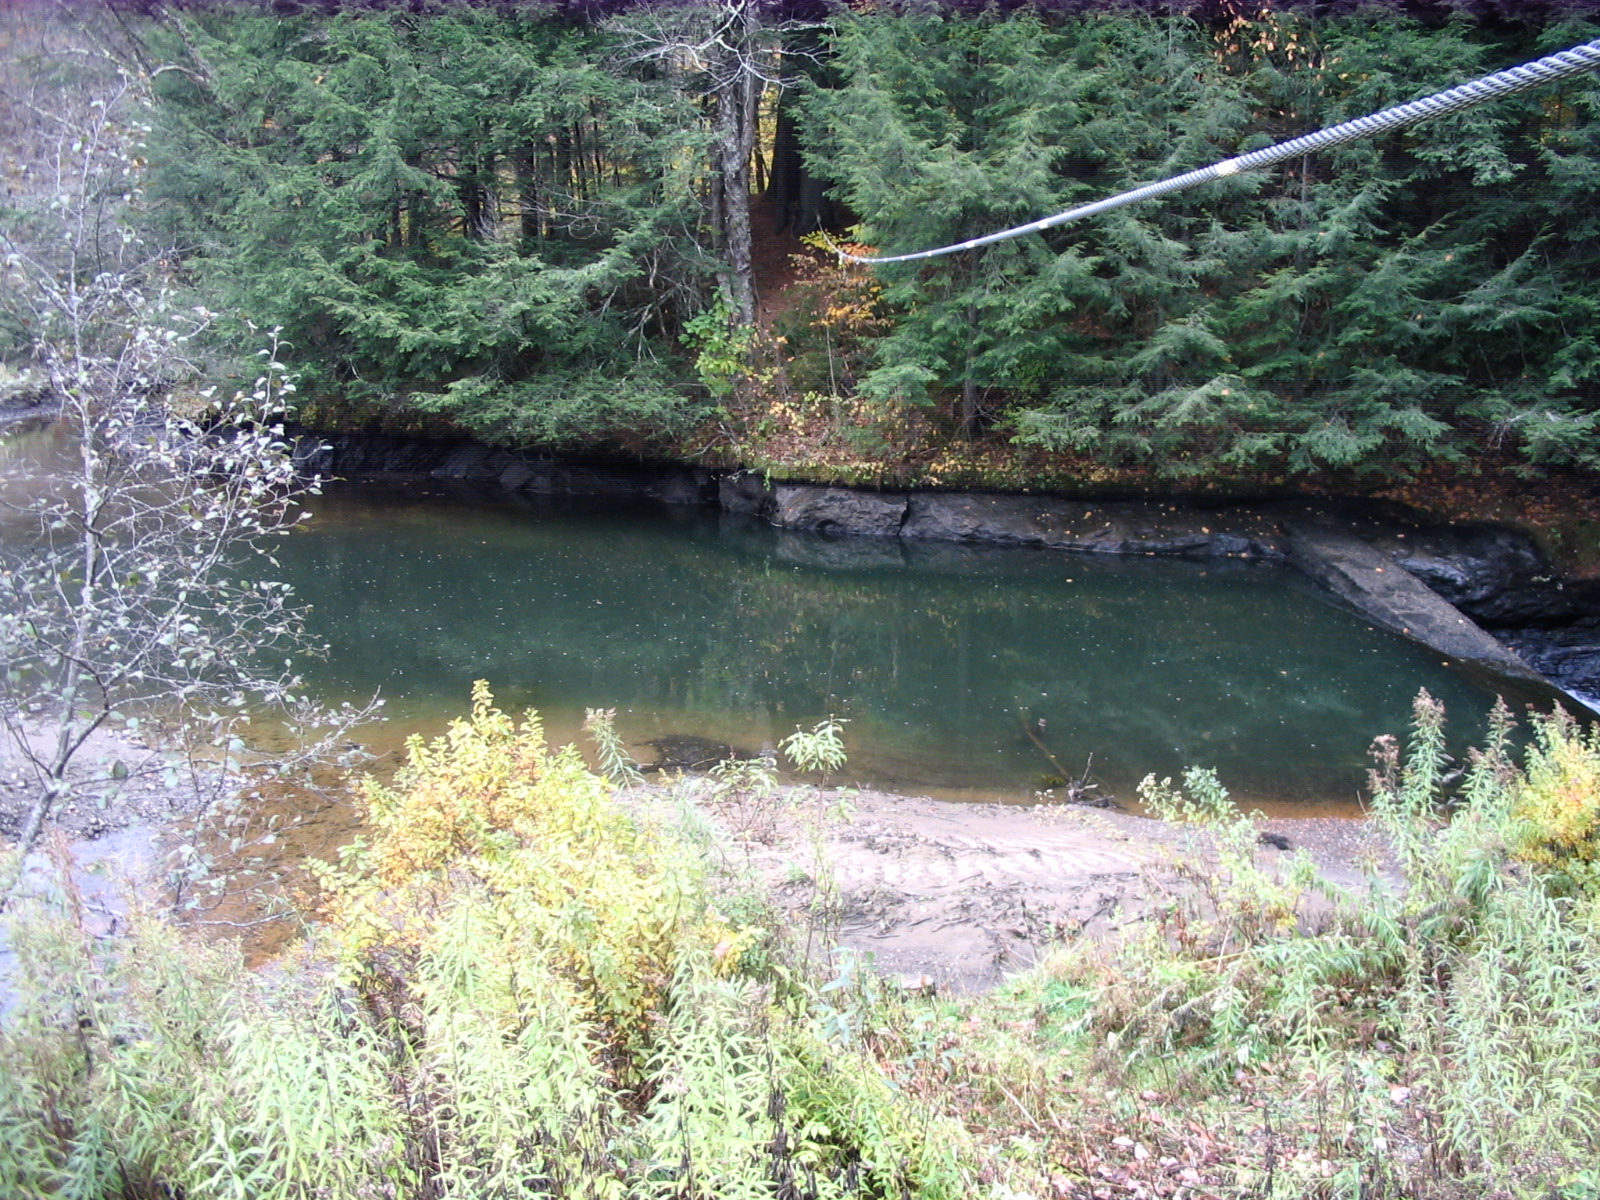 Photograph of a pool just upstream of the Little River at Waterbury Reservoir, VT (WRSV1)